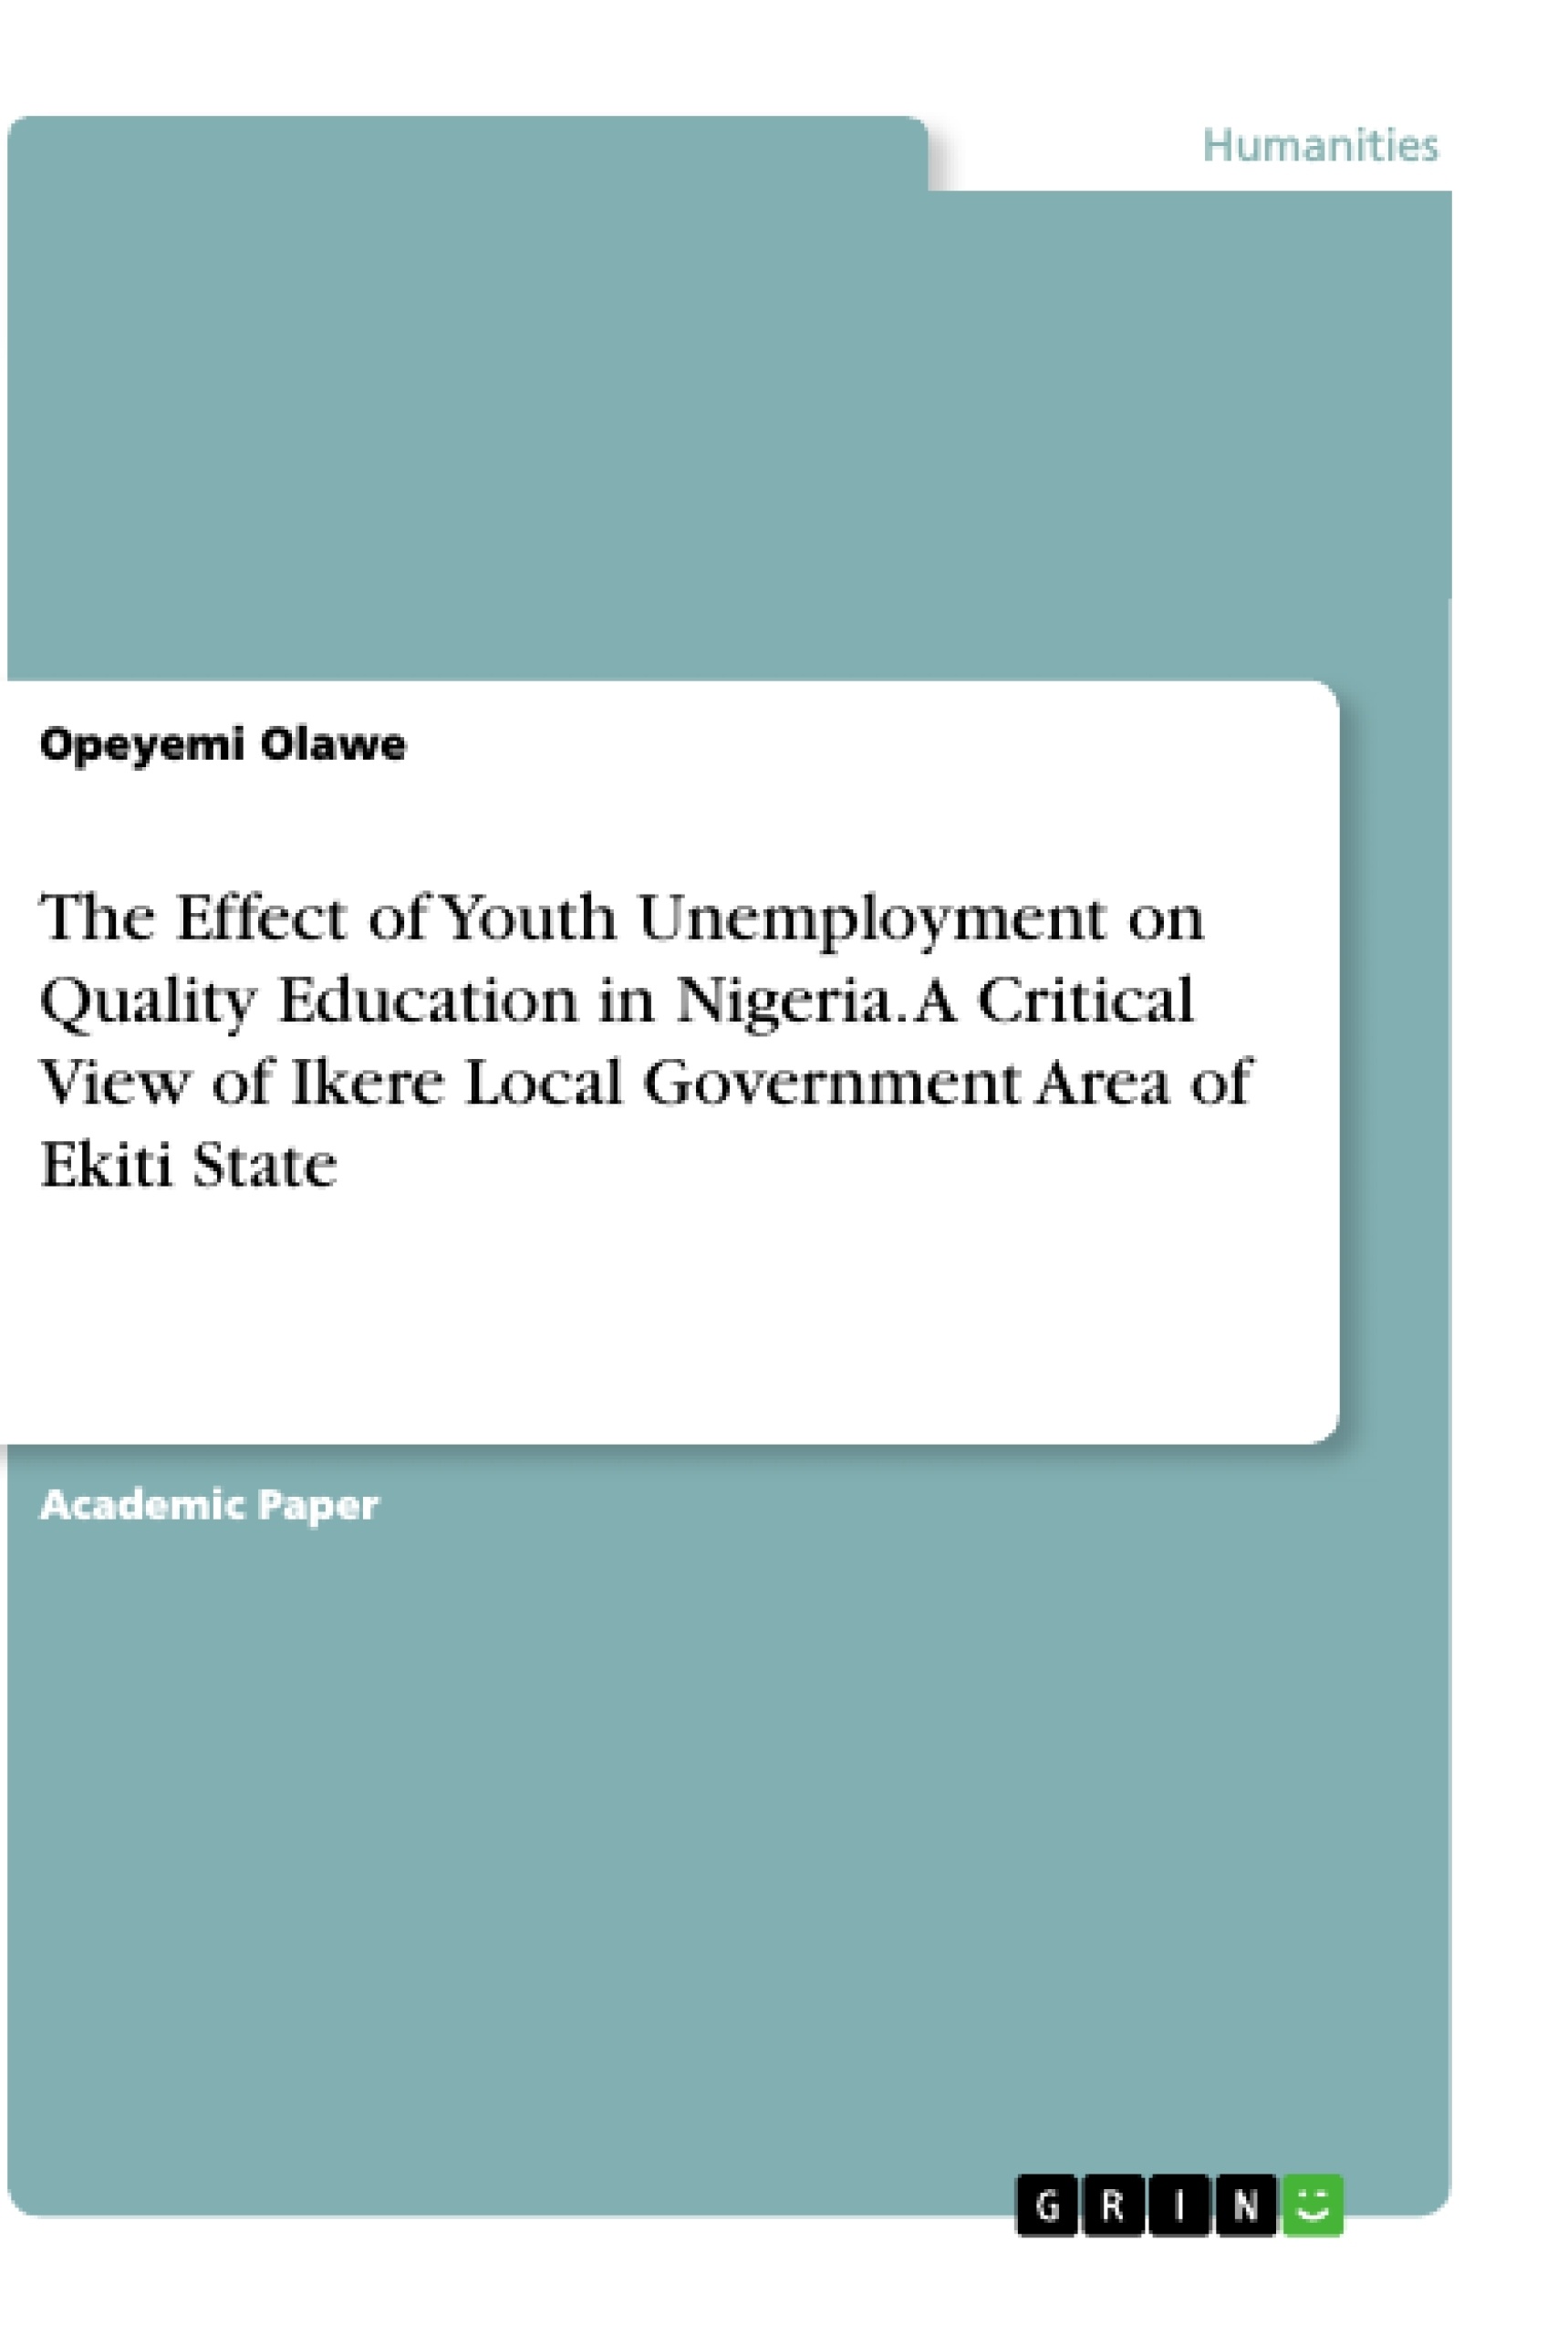 Titre: The Effect of Youth Unemployment on Quality Education in Nigeria. A Critical View of Ikere Local Government Area of Ekiti State